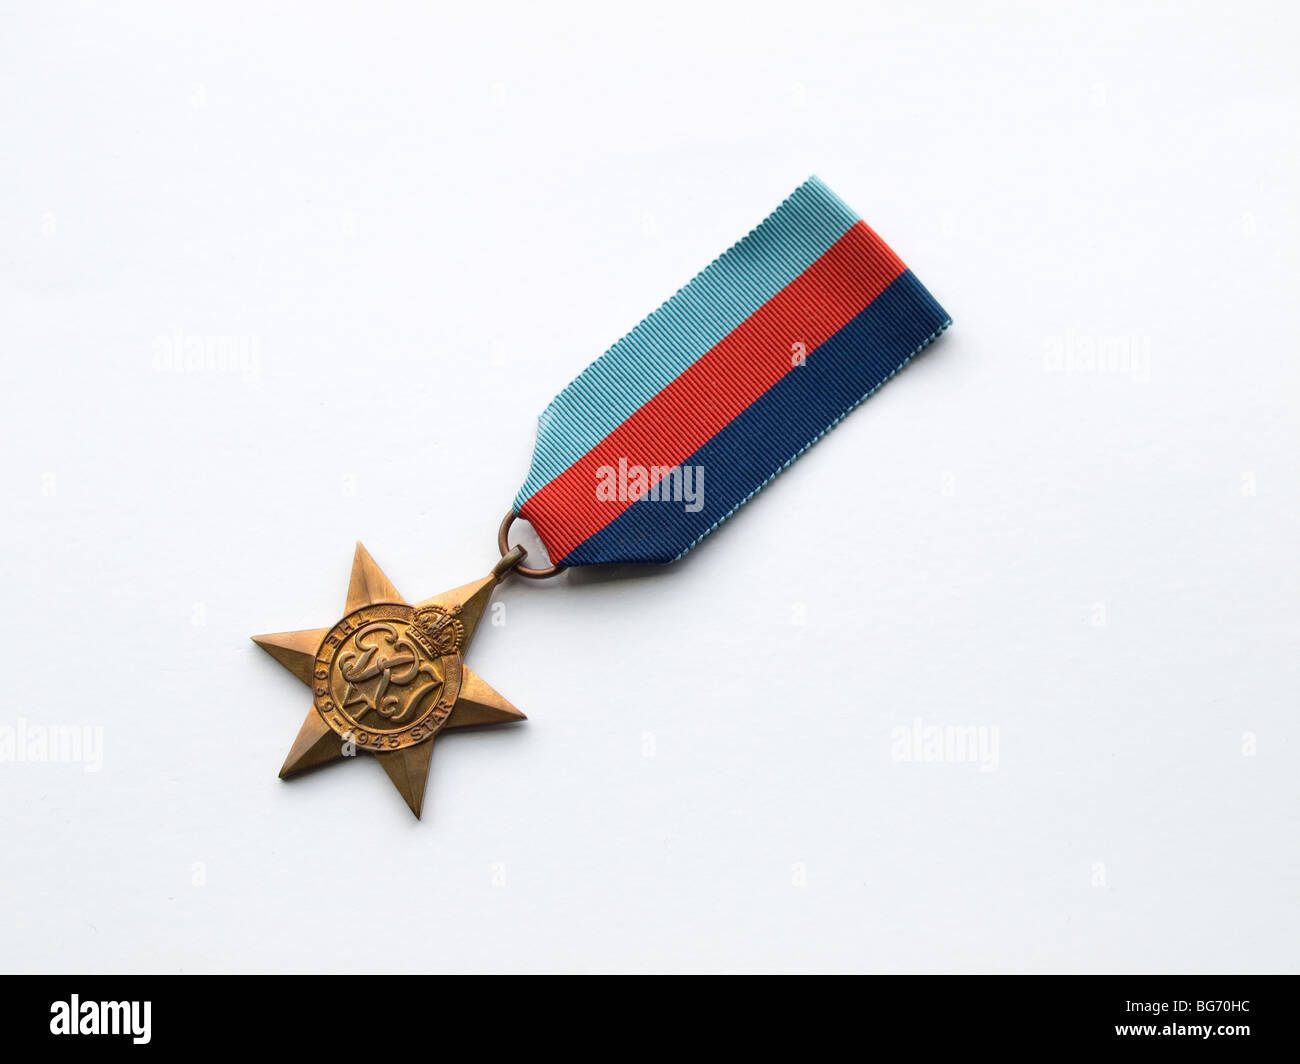 The 1393-1945 Star a World War 2 Medal awarded to British and Commonwealth Troops on a white background Stock Photo